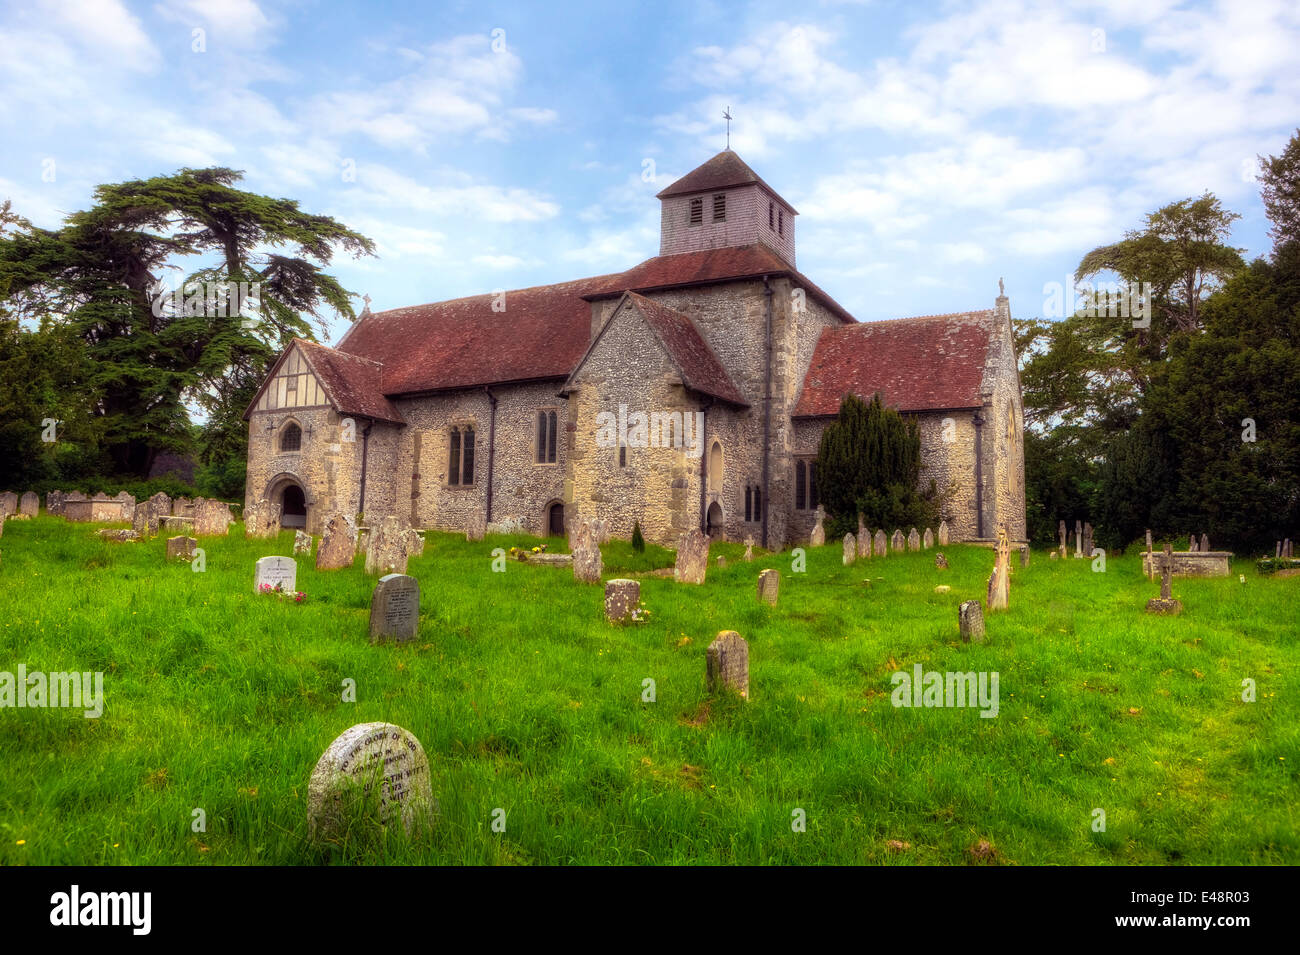 L'église St Mary, Breamore, Hampshire, Angleterre, Royaume-Uni Banque D'Images